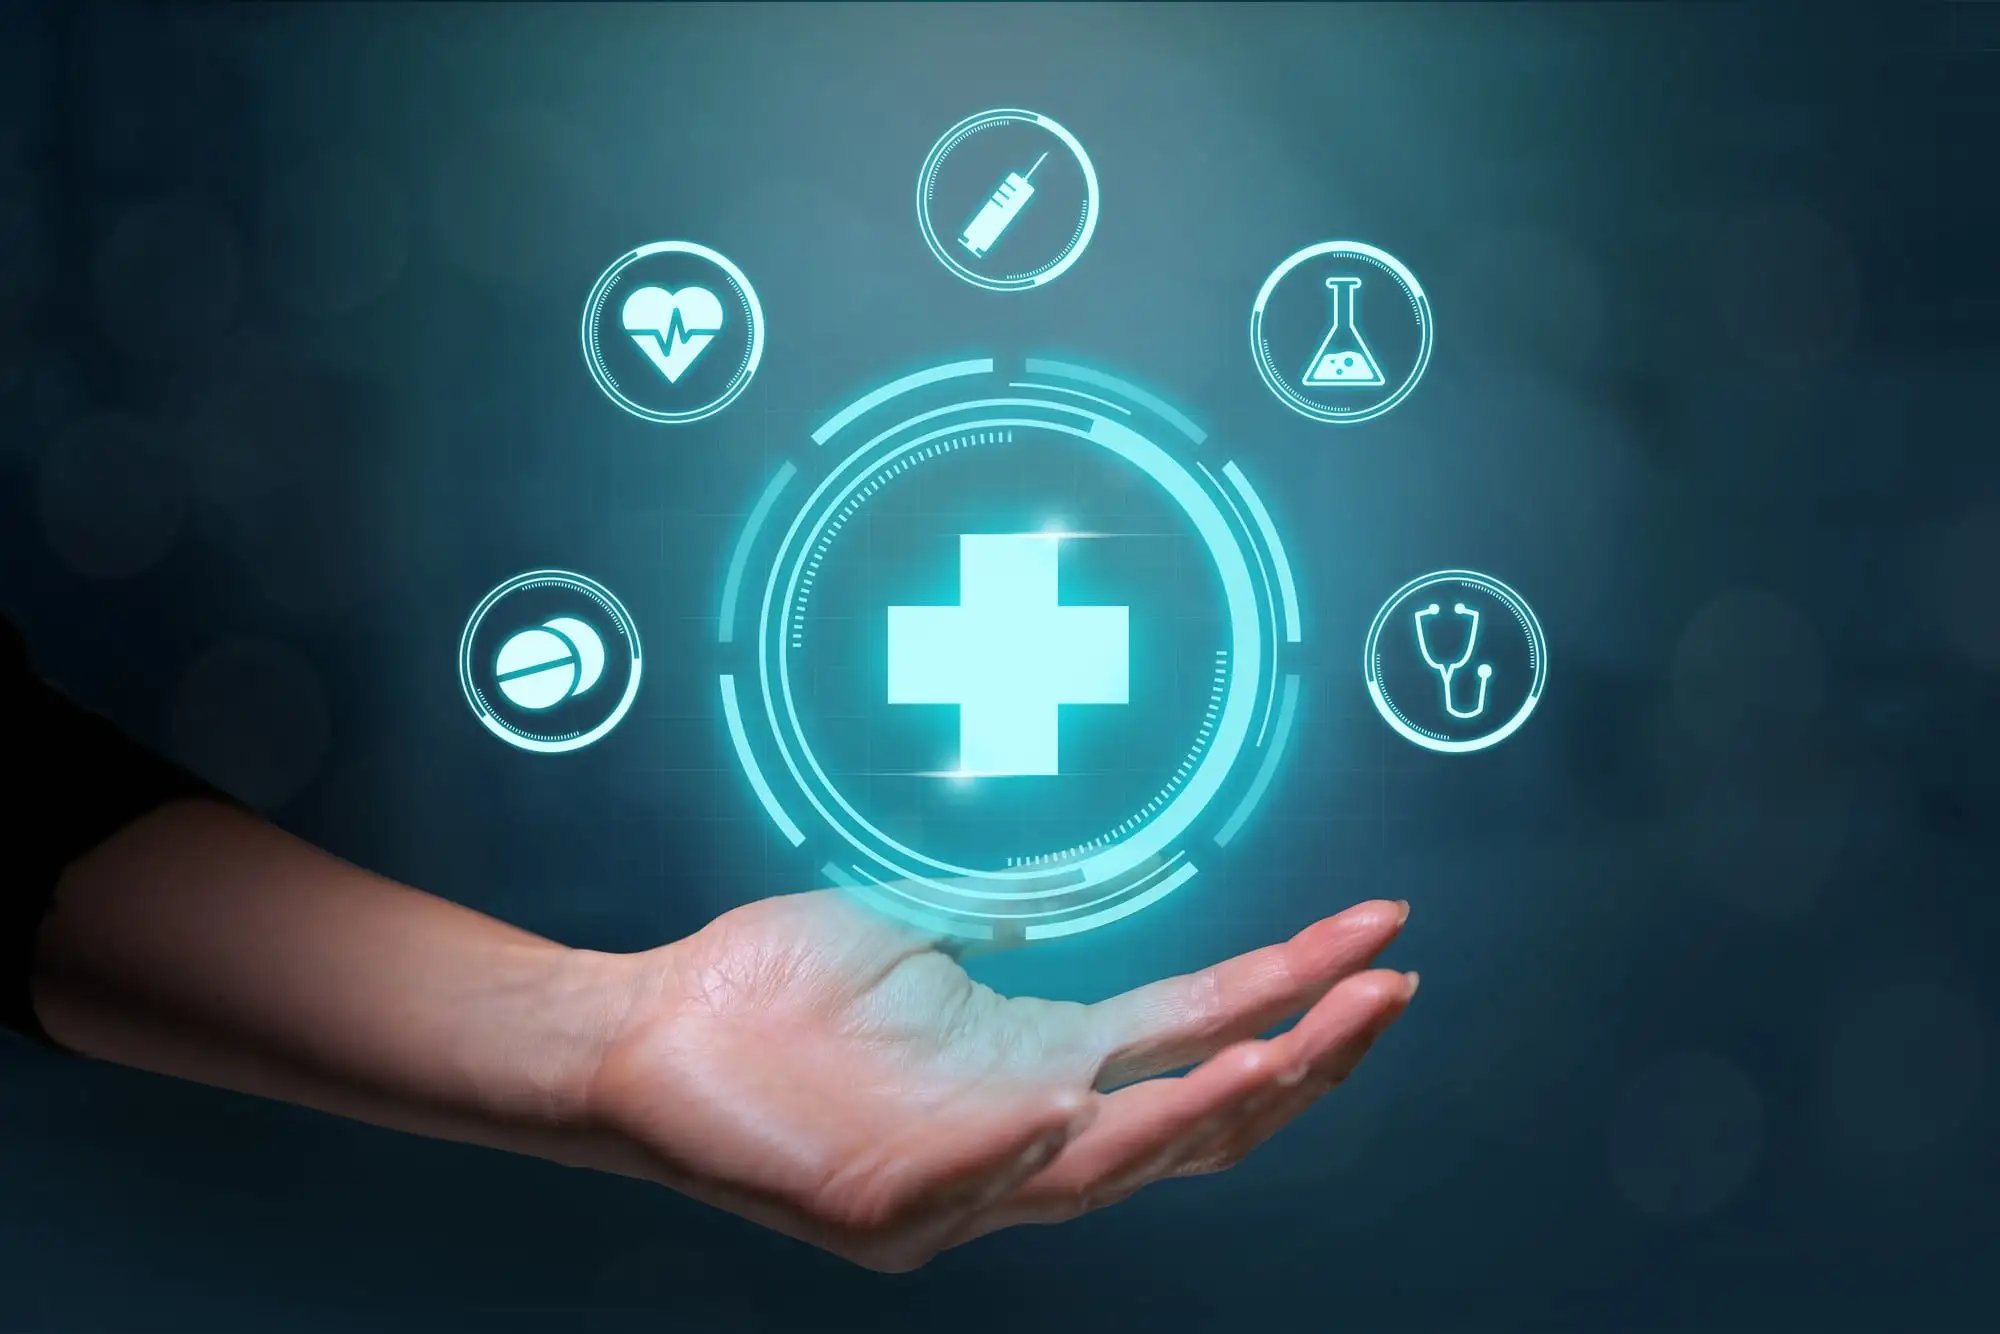 healthcare-concept-with-futuristic-design-graphics-medical-treatment-icons